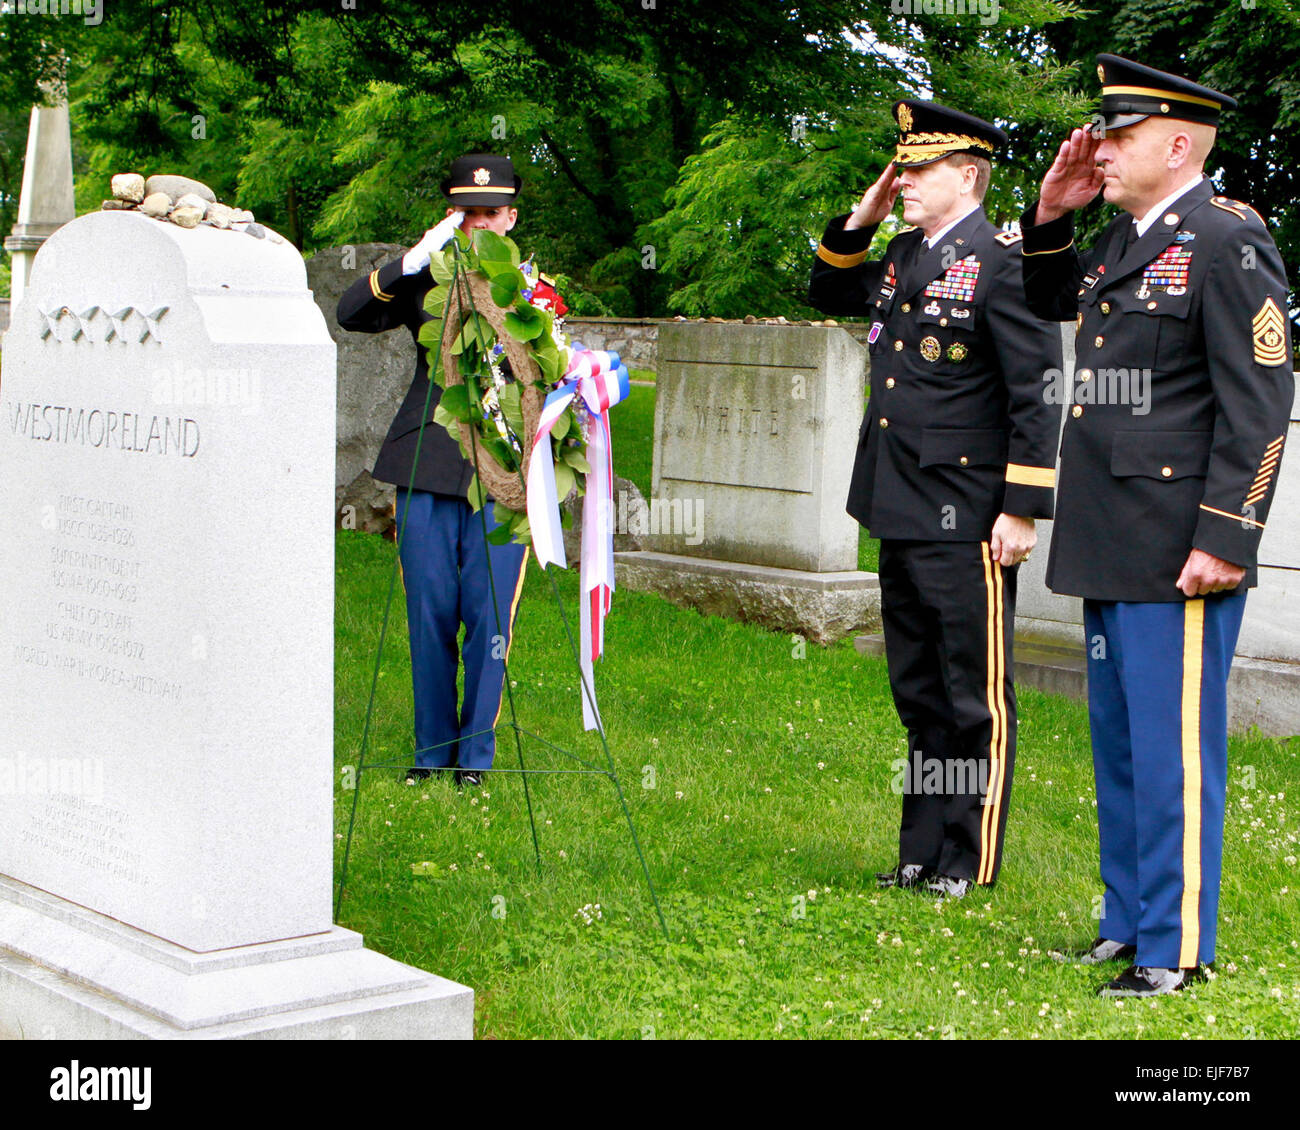 The 57th Superintendent of the U.S. Military Academy, Lt. Gen. Buster Hagenbeck, and Command Sgt. Maj. Anthony Mahoney, West Point's senior non-commissioned officer, render a hand salute after placing a wreath at the grave of Gen. William S. Westmoreland, former Army Chief of Staff and West Point Superintendent from 1960-1963, June 14, 2010. The wreath laying ceremony was a part of West Point's 235th Army Birthday celebration. : Tommy Gilligan.   The 235th U.S. Army Birthday  235/ Stock Photo